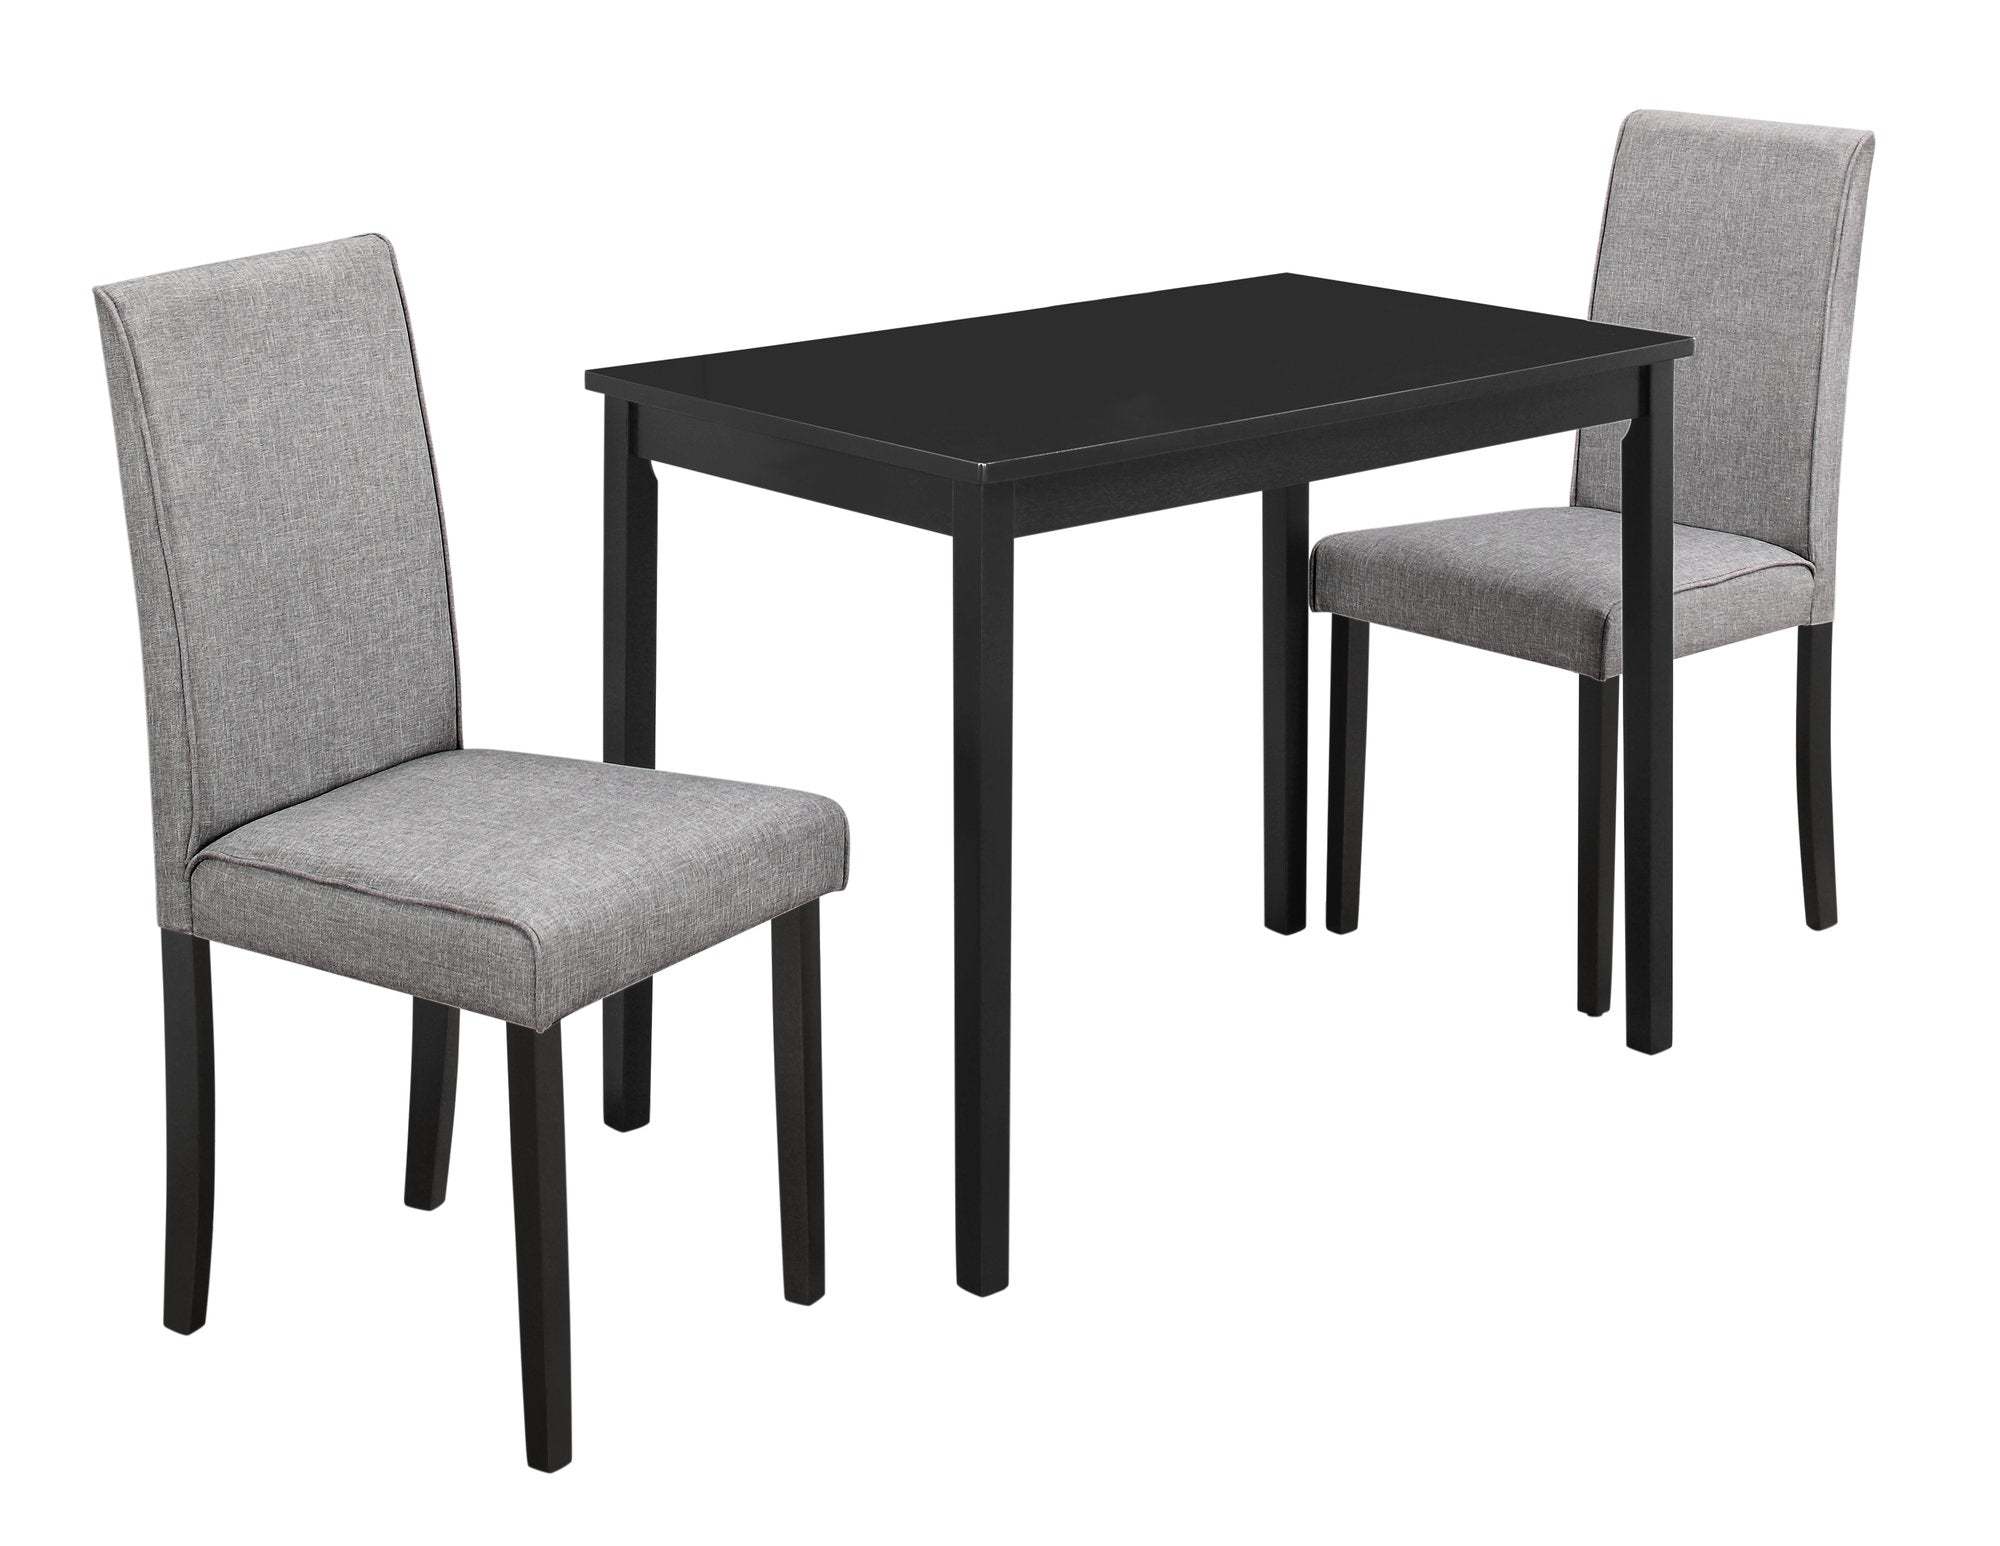 Adda Modern Home Wooden Dining Table With 2 Grey Linen Parson Chairs Set